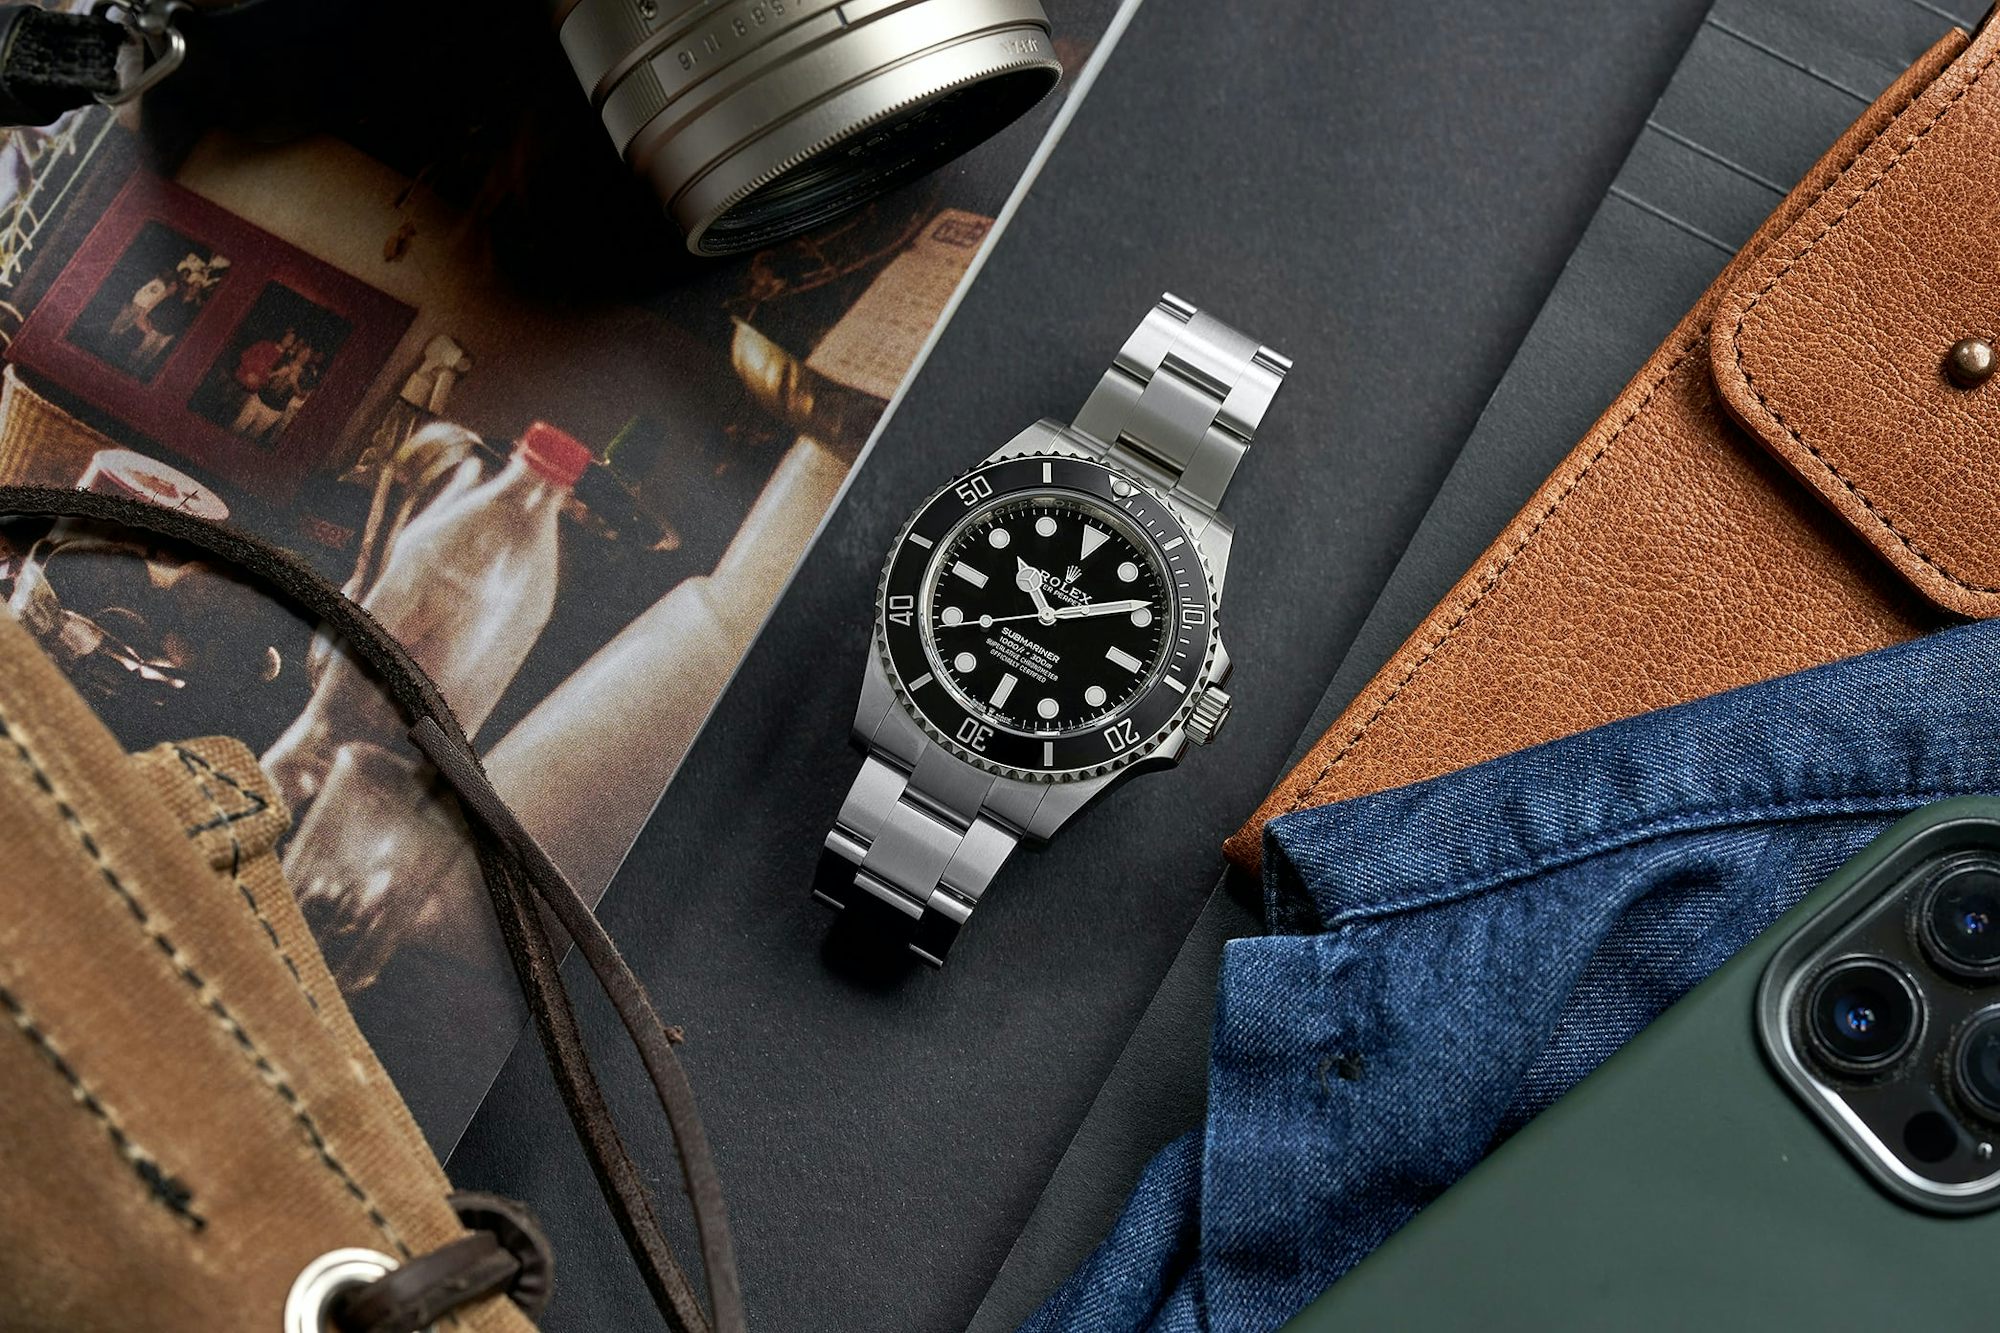 Rolex Submariner next to iPhone, camera, and other desktop items.